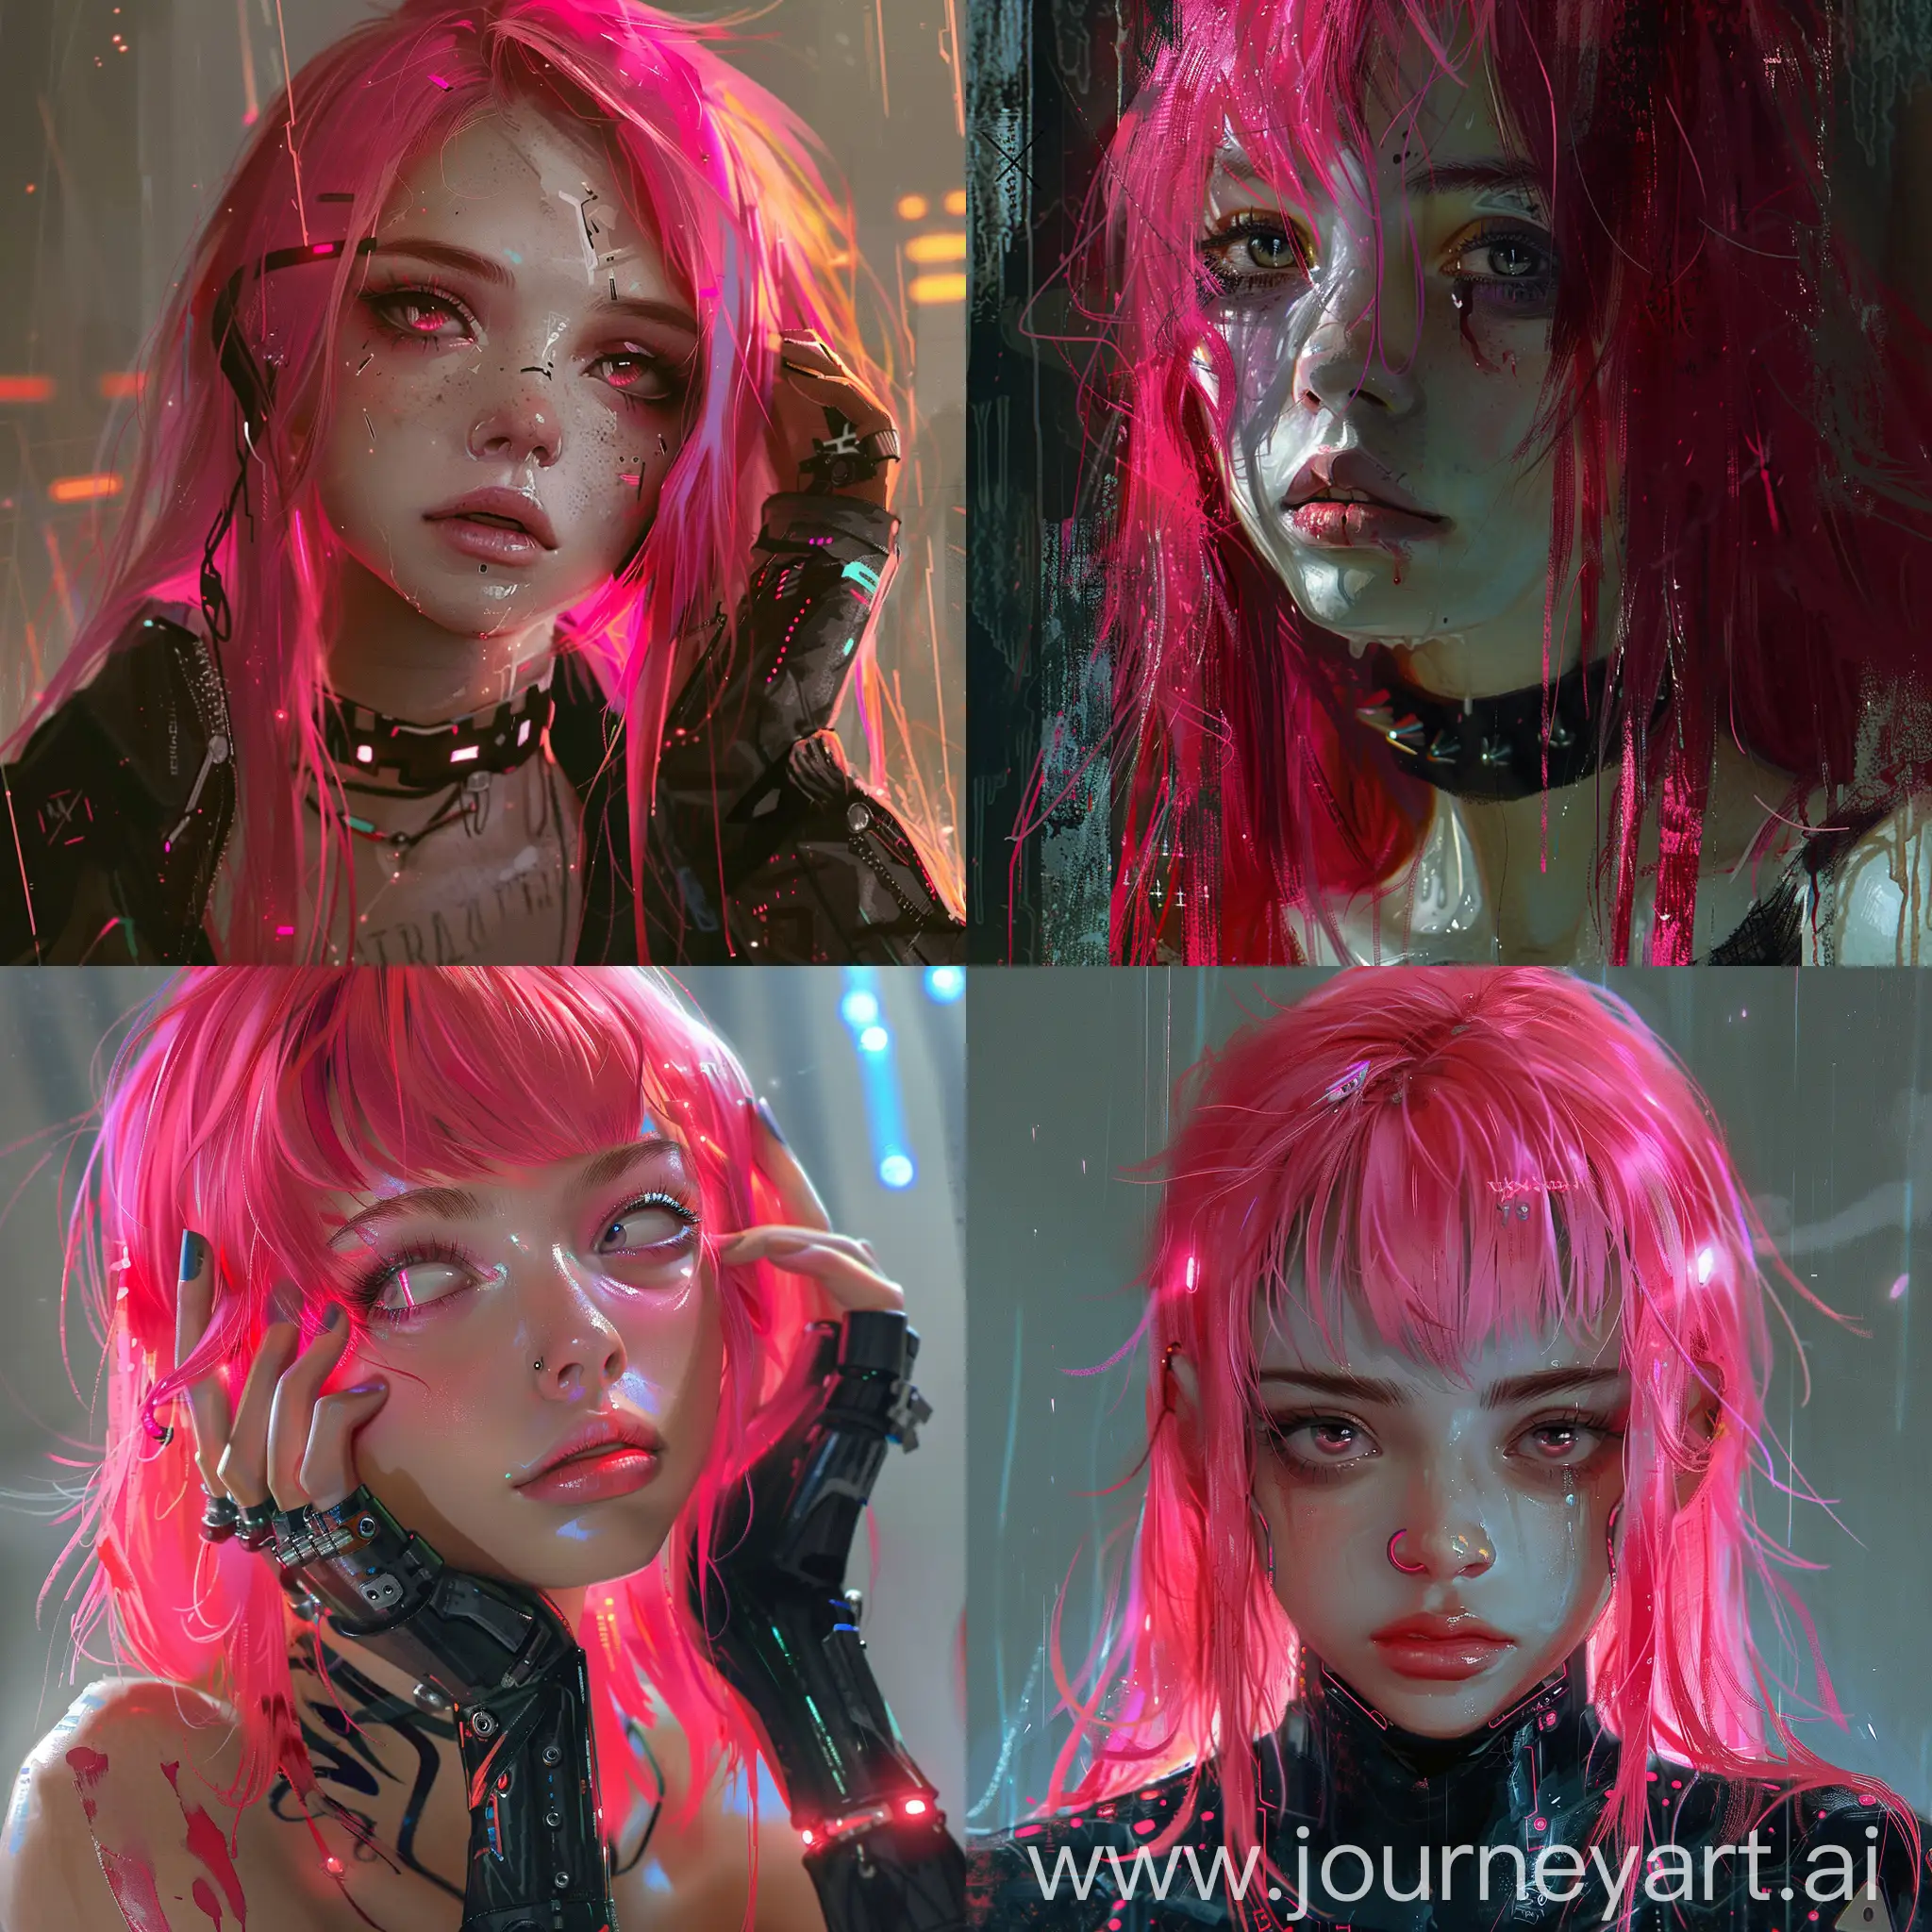 Cyberpunk-Portrait-of-a-Passionate-20YearOld-Girl-with-Pink-Hair